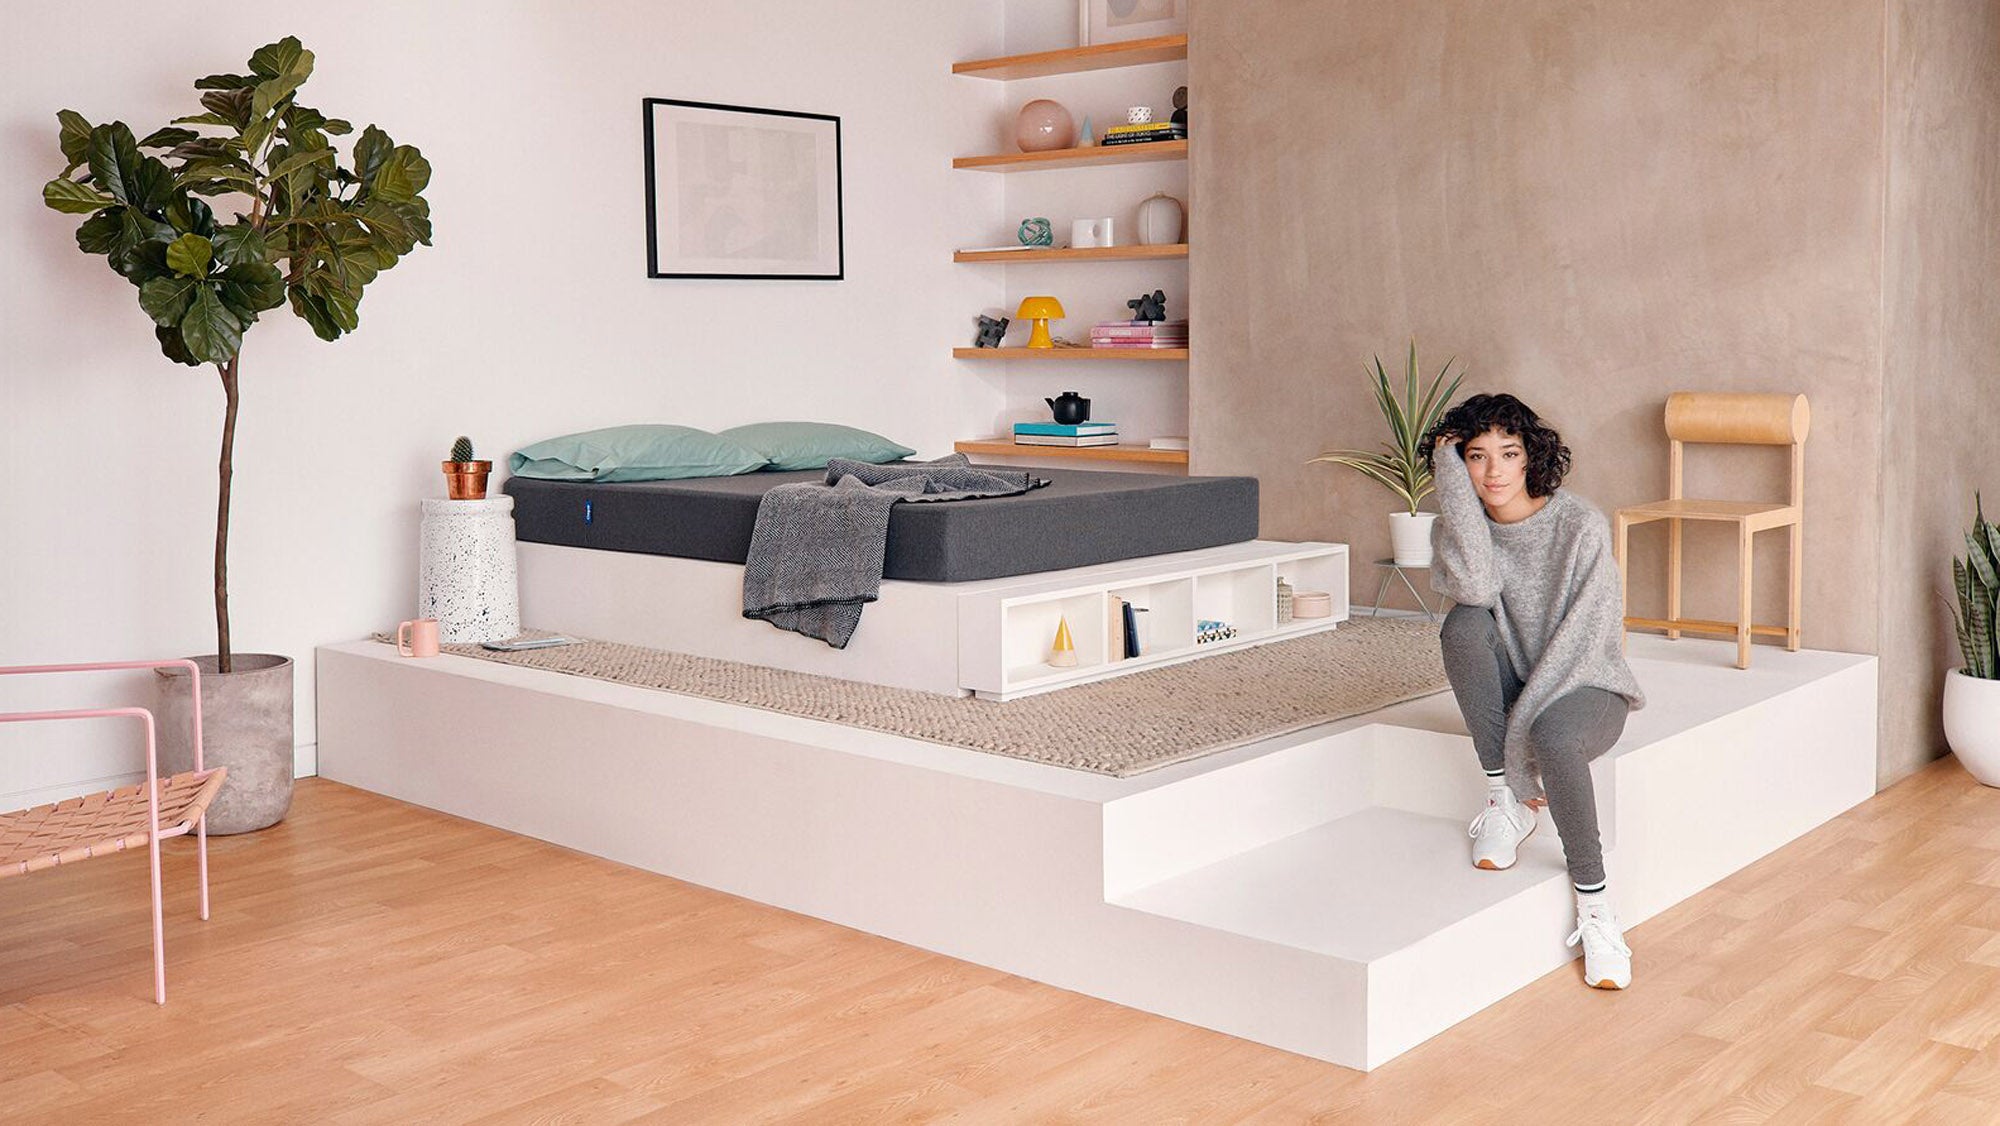 Ikea morgedal mattress: Exploring the Comfort and Quality插图2